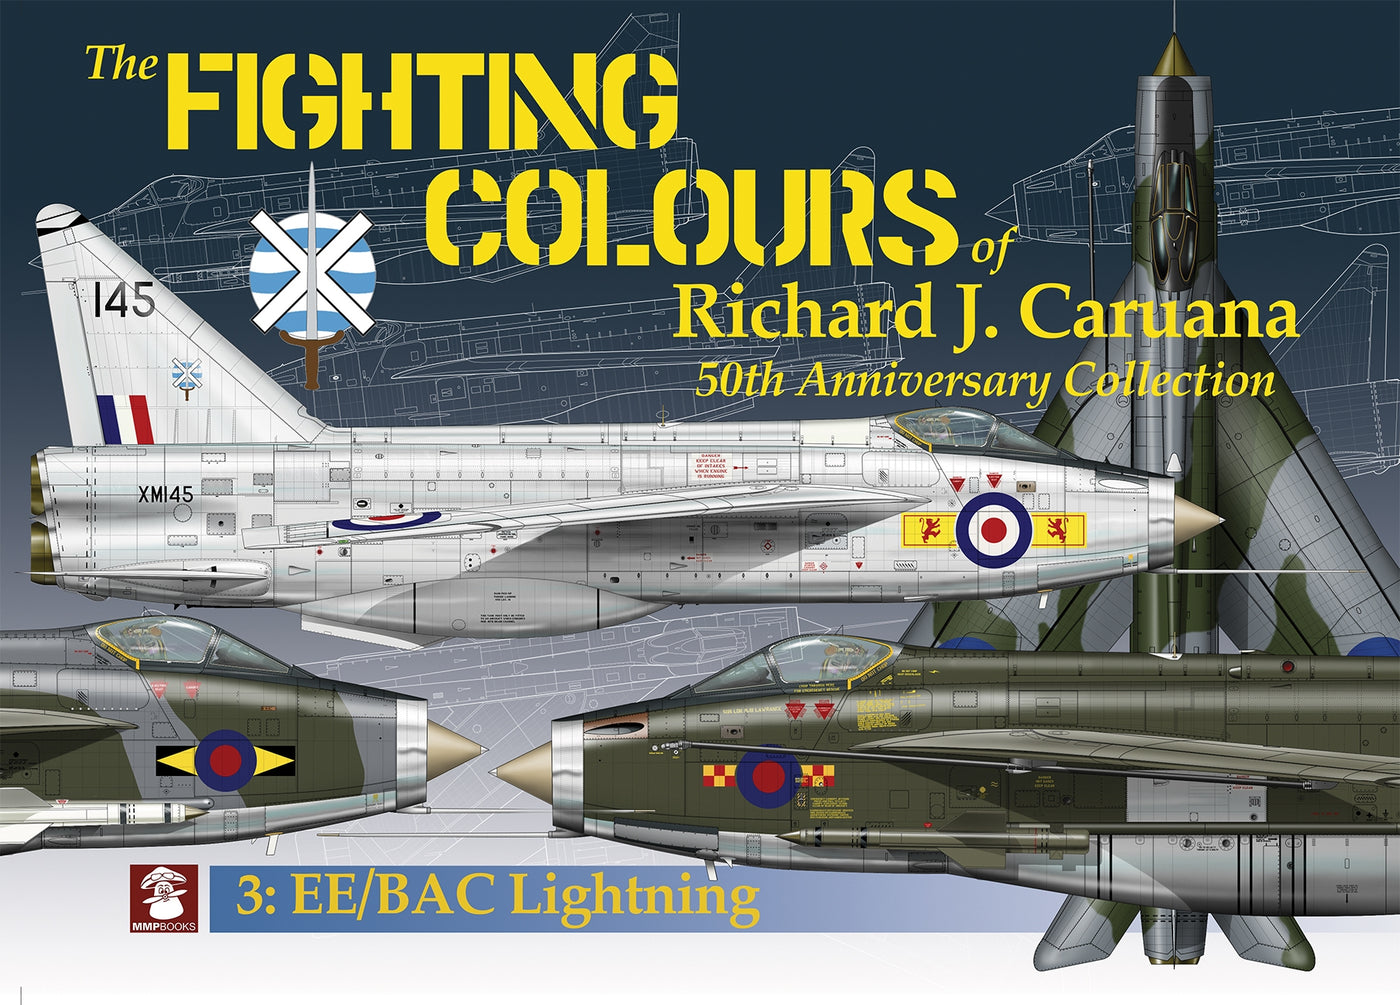 The Fighting Colours of Richard J. Caruana.